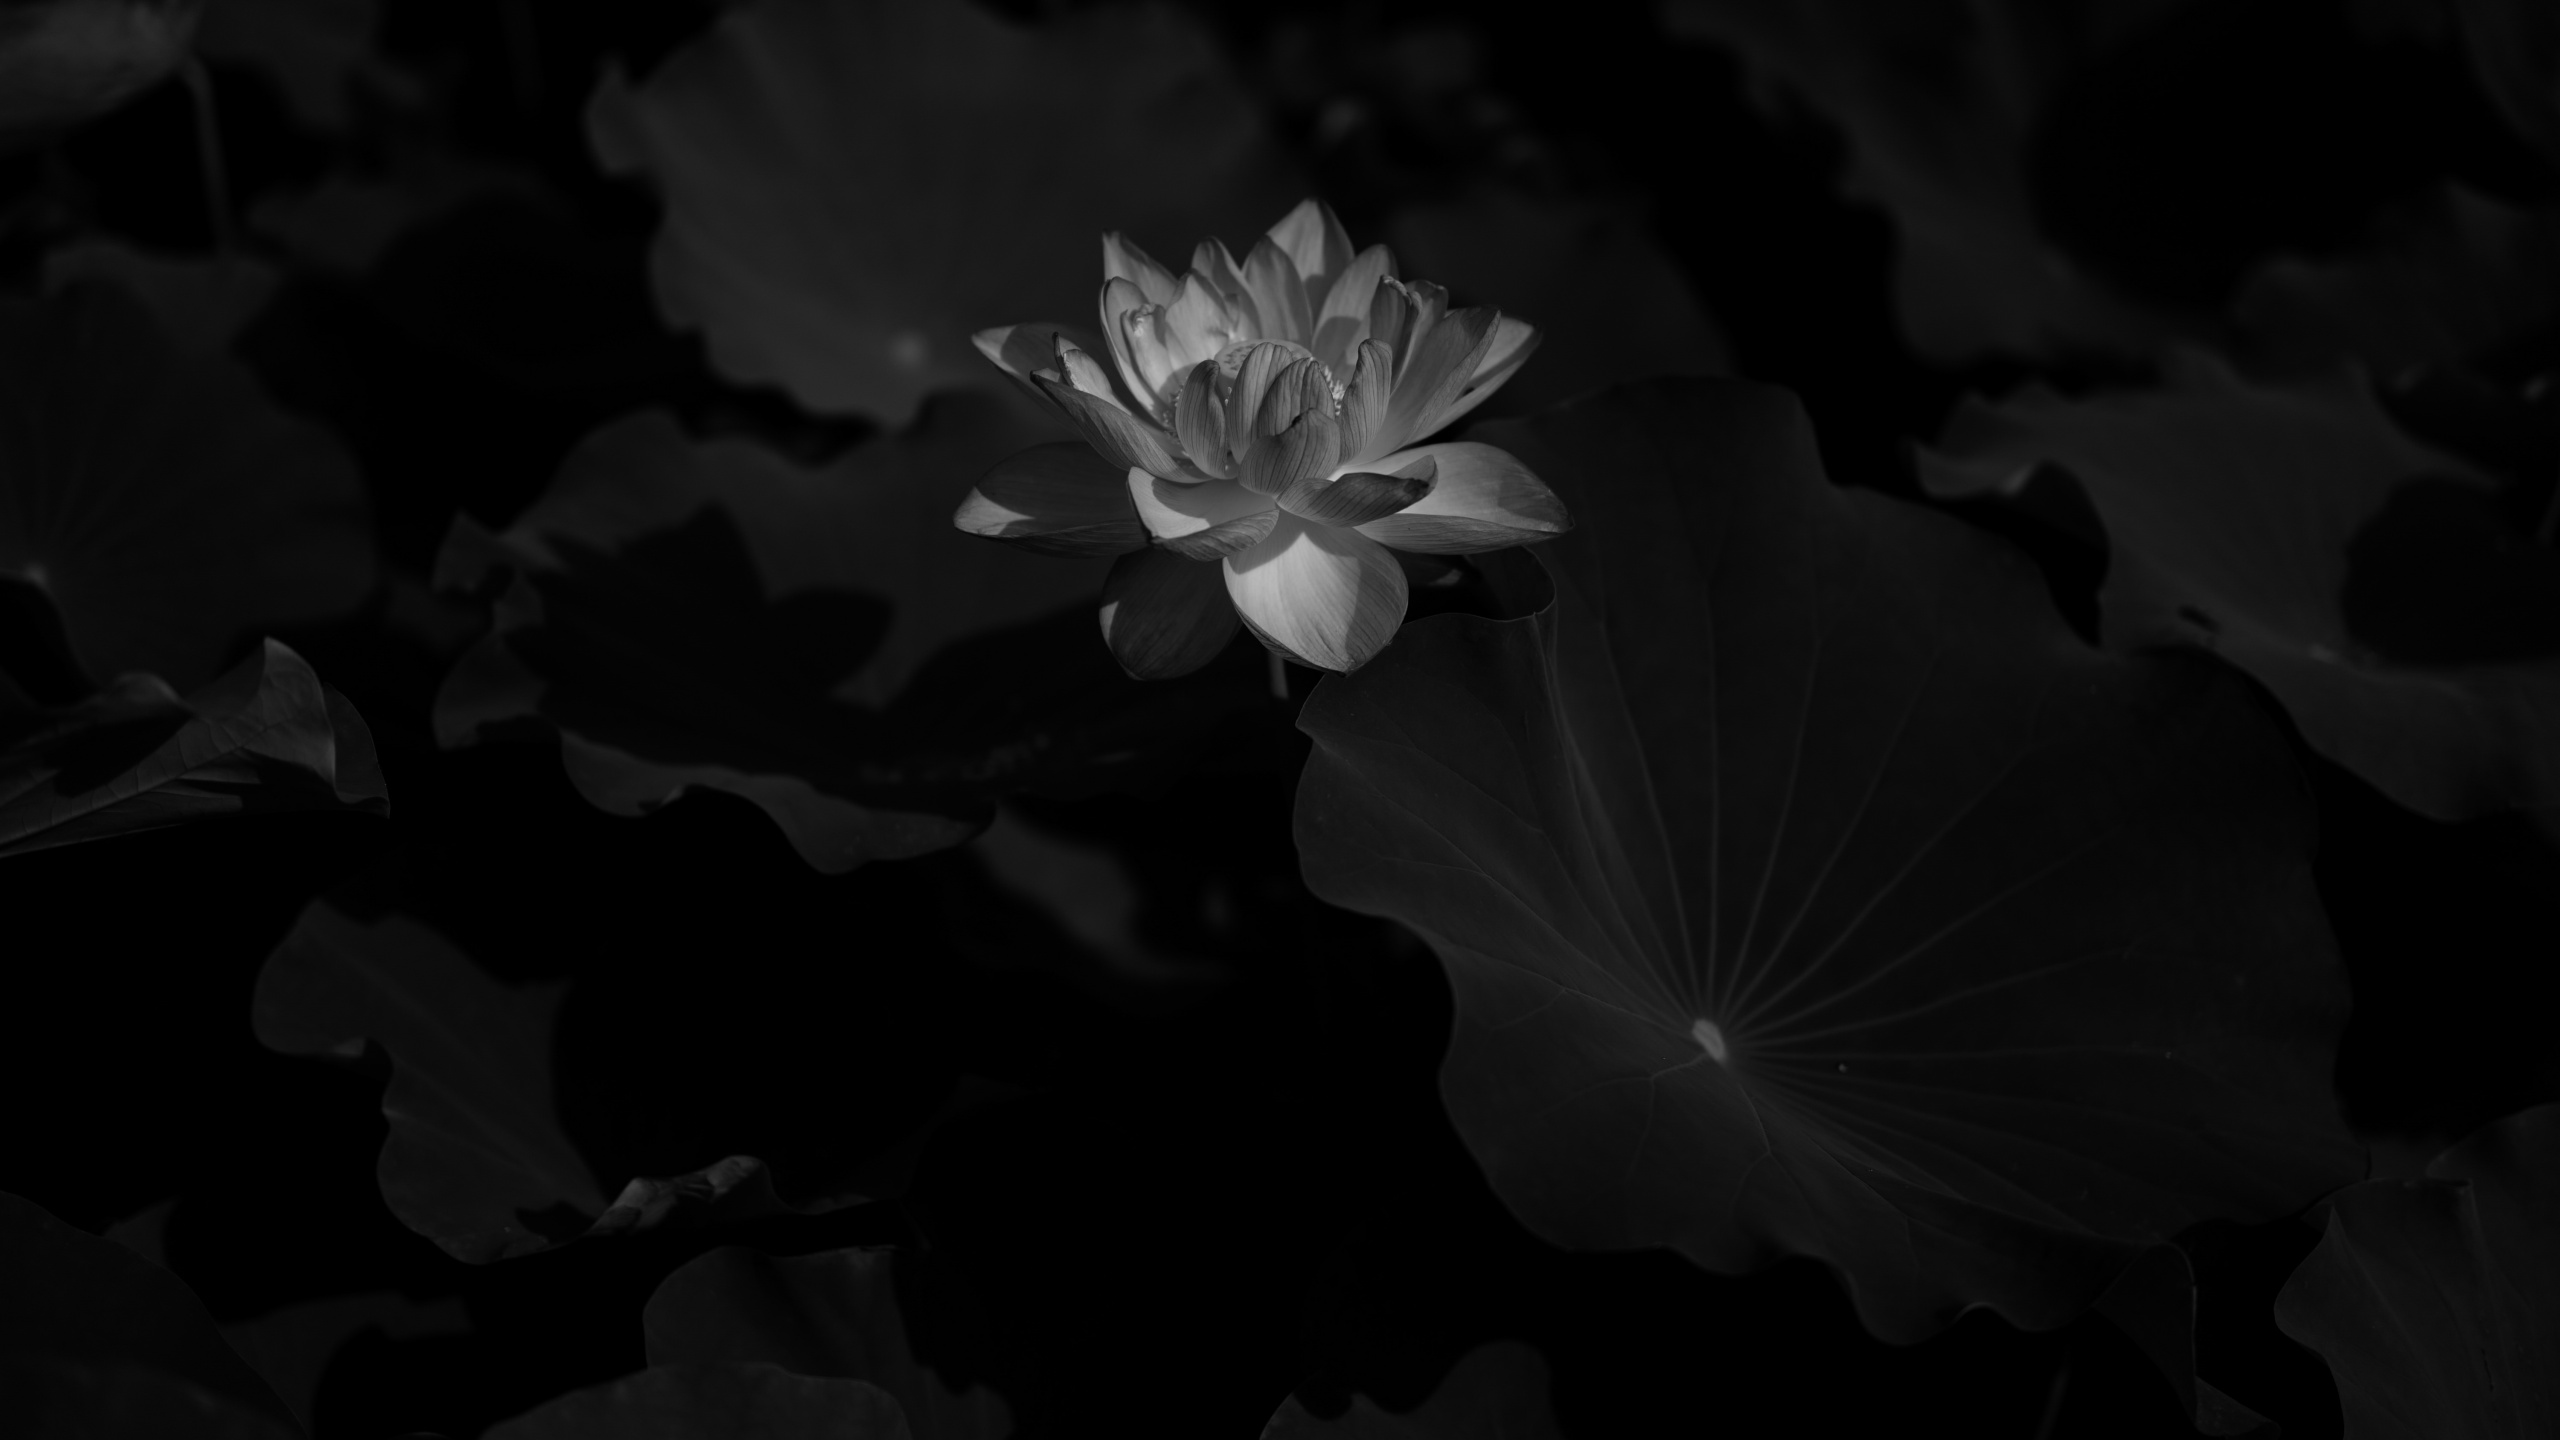 Grayscale Photo of a Flower. Wallpaper in 2560x1440 Resolution